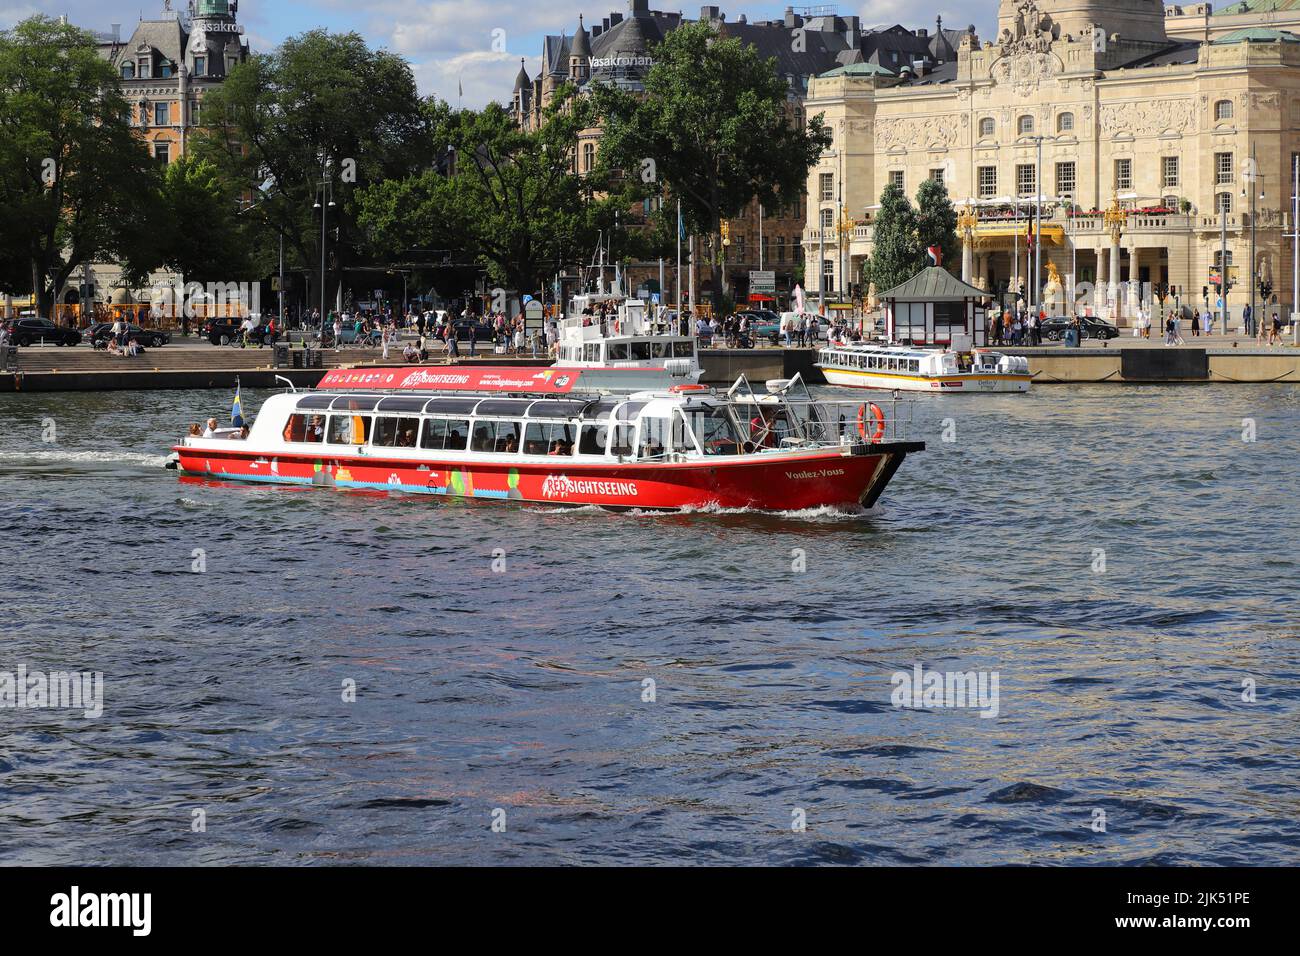 Stockholm, Sweden - July 29, 2022: Red Sightseeing boat at Nybroviken withe Royal playhouse in the background. Stock Photo